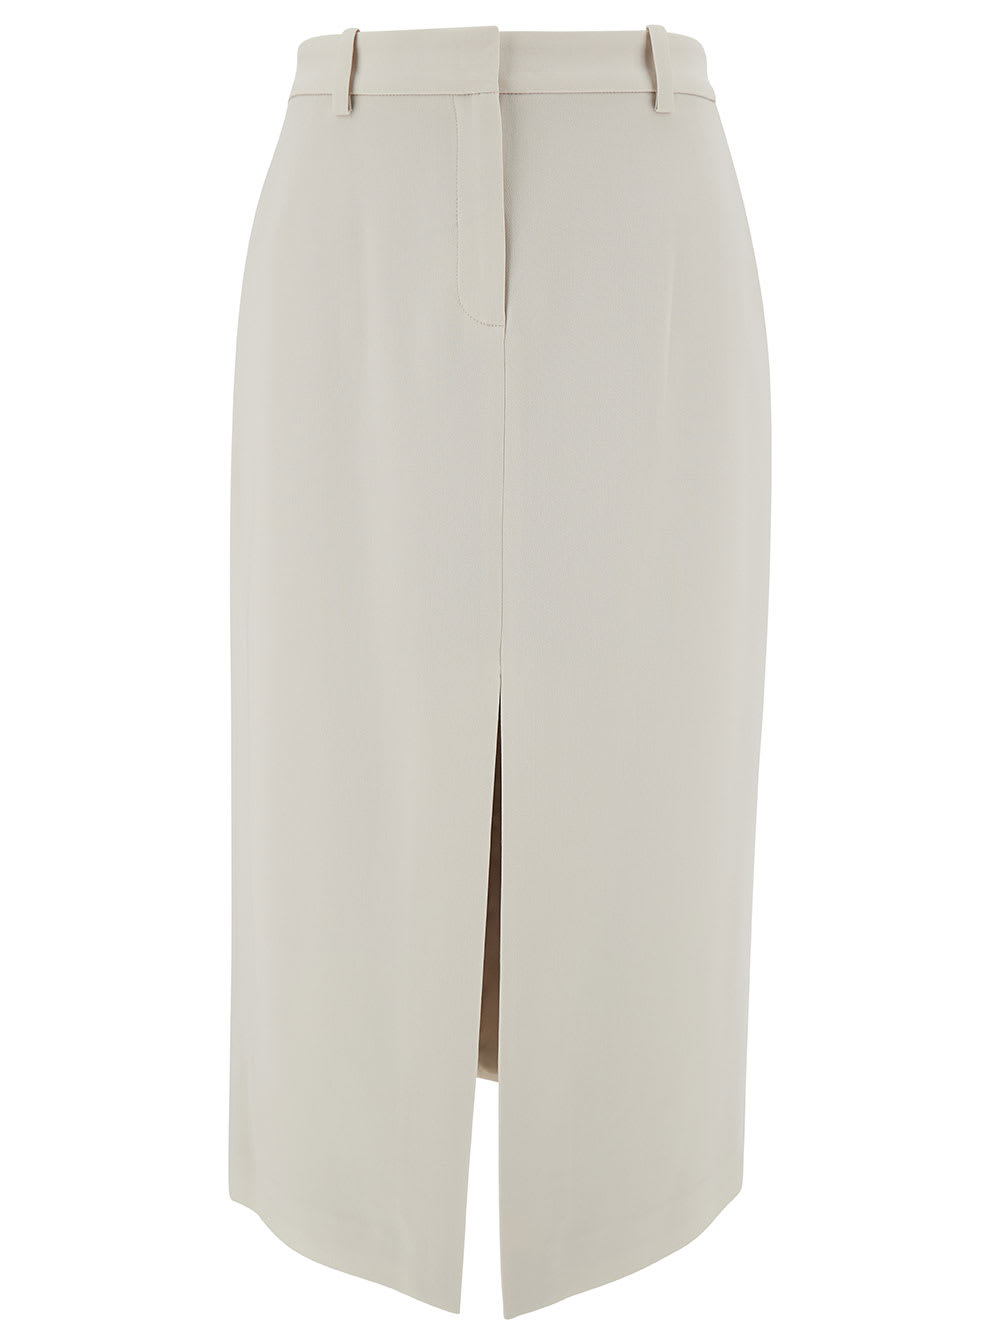 Midi White Straight Skirt With Front Split In Triacetate Blend Woman